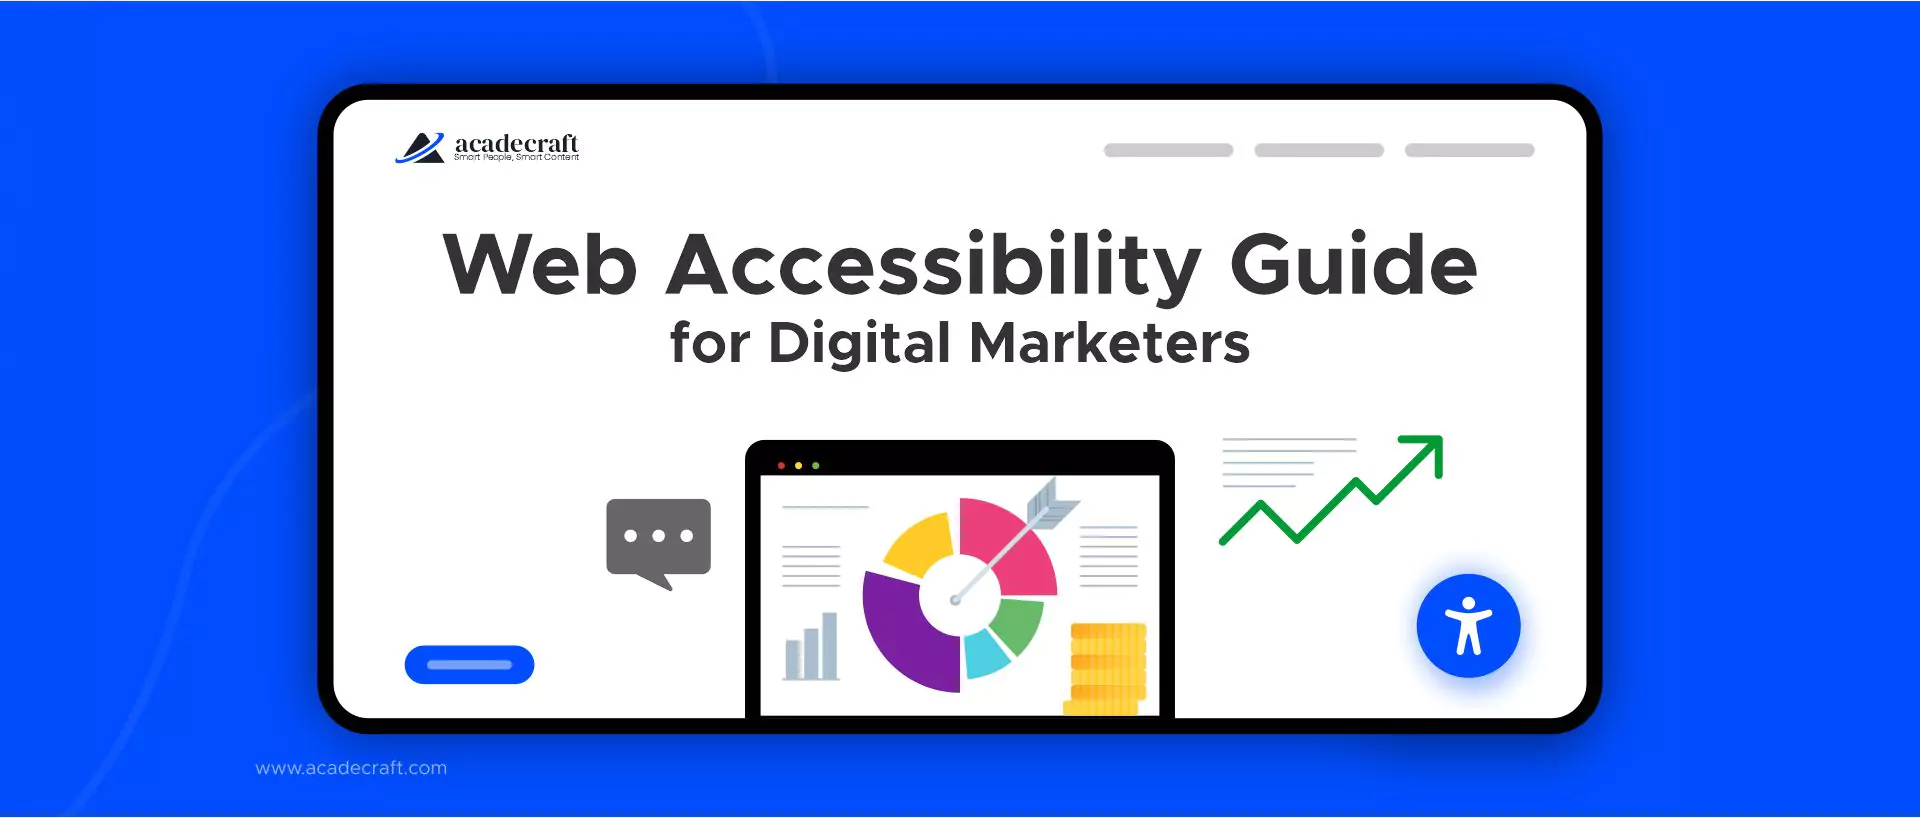 Web Accessibility Guide for Digital Marketers